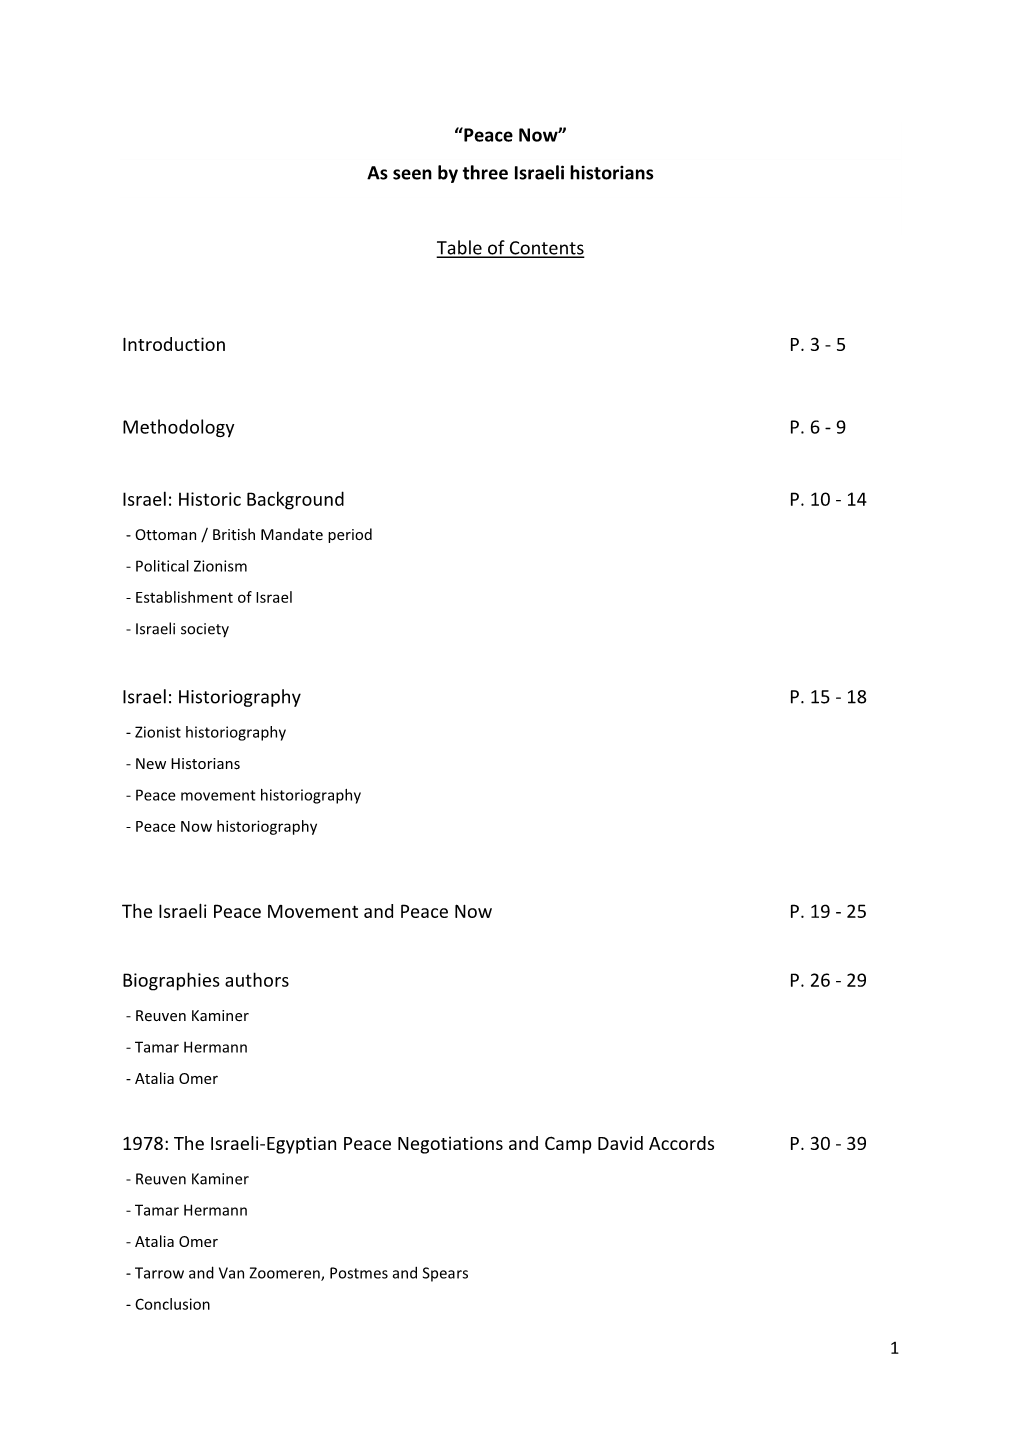 As Seen by Three Israeli Historians Table of Contents